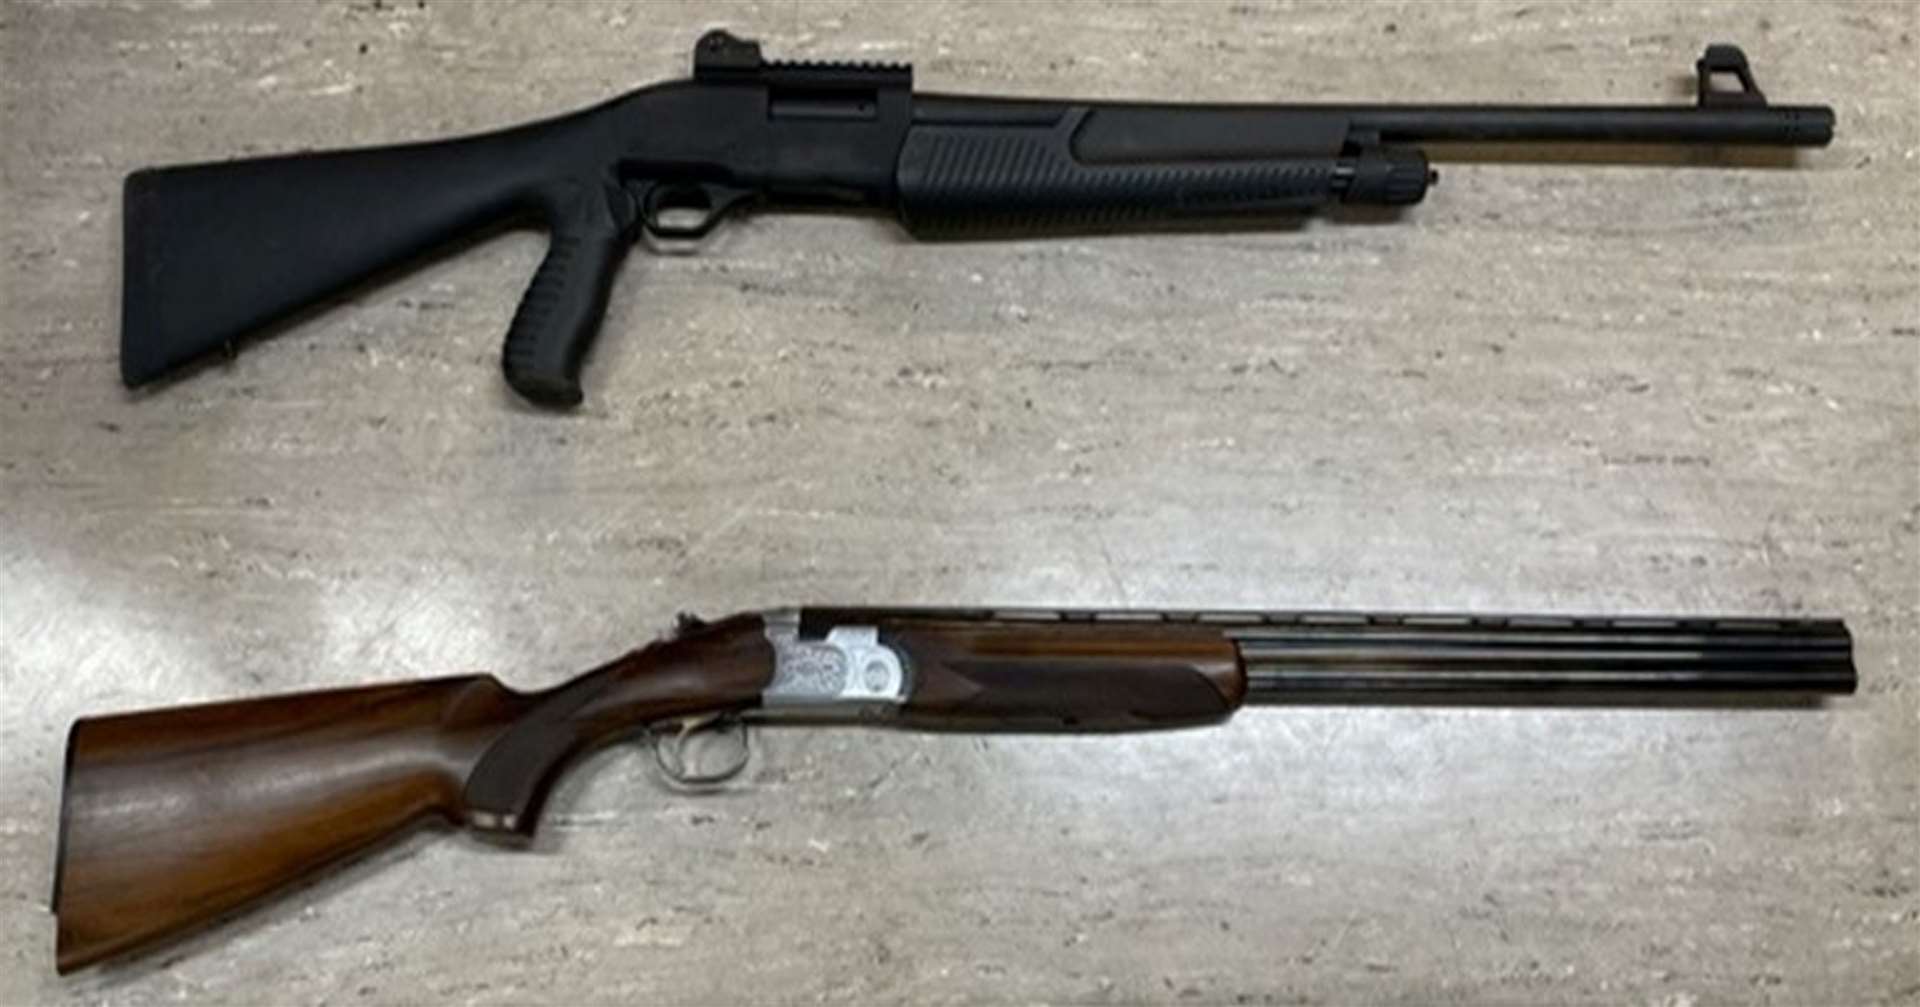 The Weatherby pump action shotgun (top) used by Jake Davison (Plymouth HM Coroner)